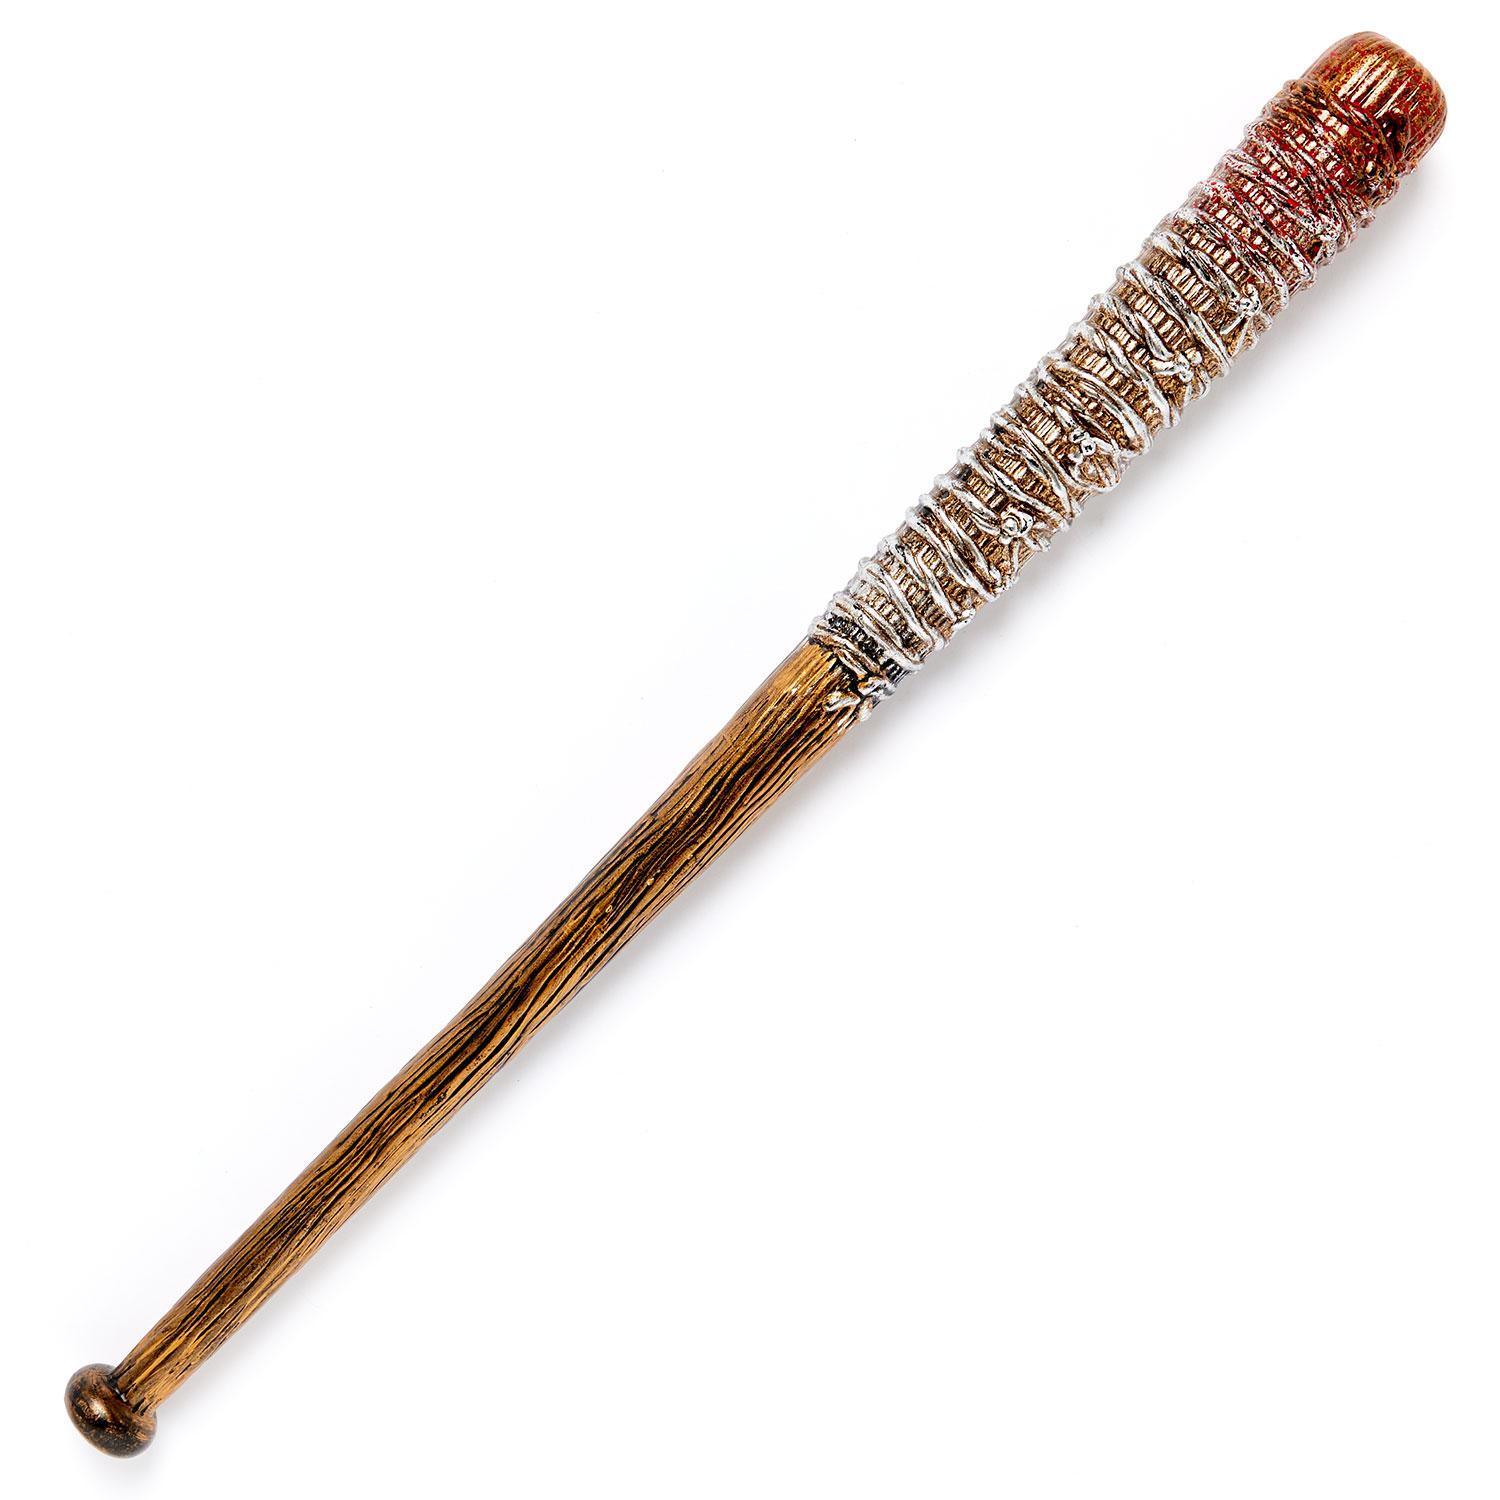 Baseball Bat with Barbed Wire